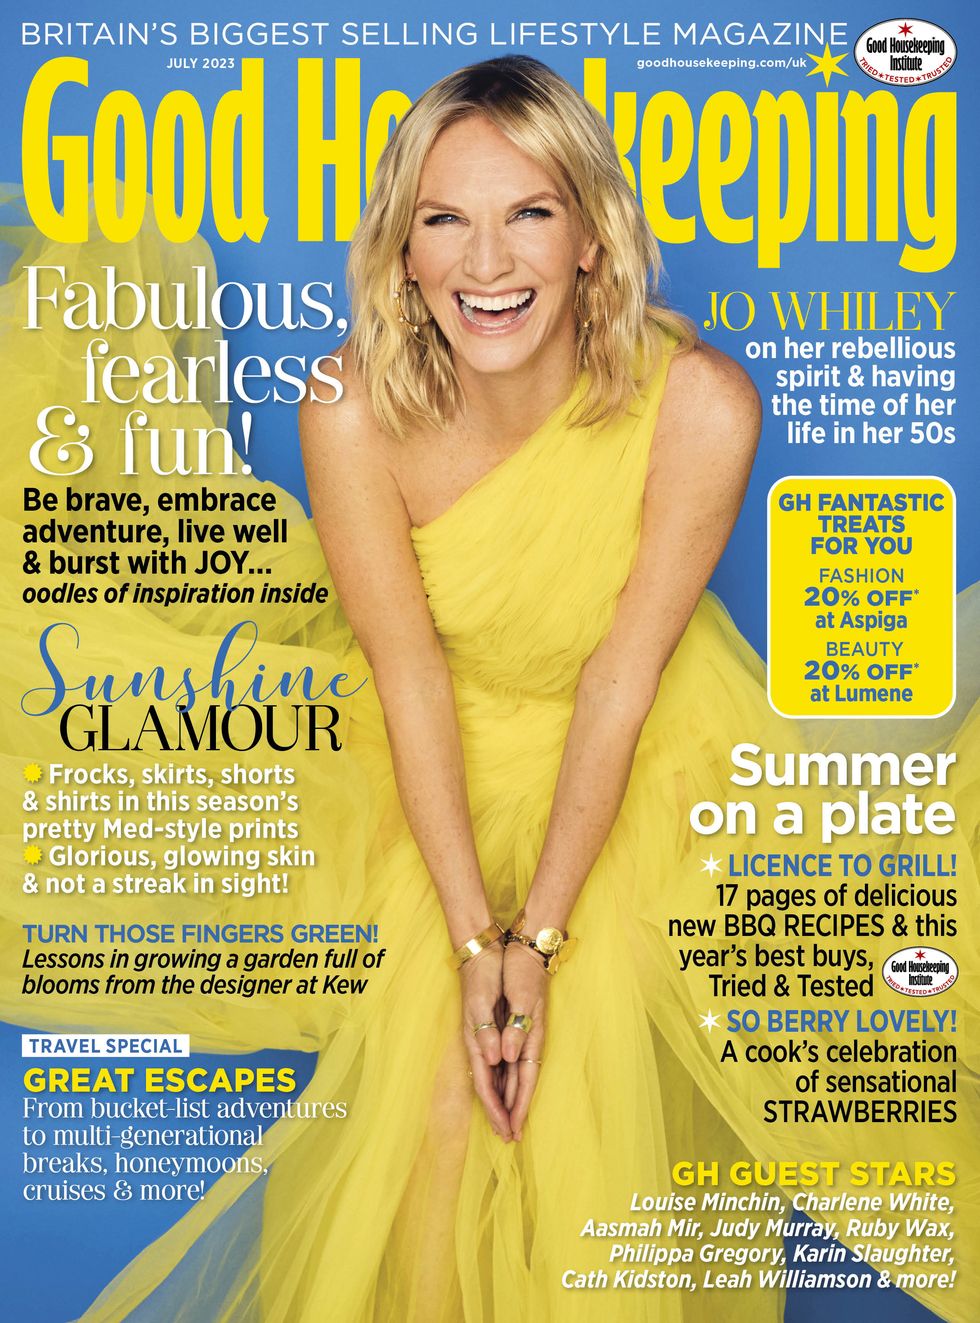 jo whiley july interview